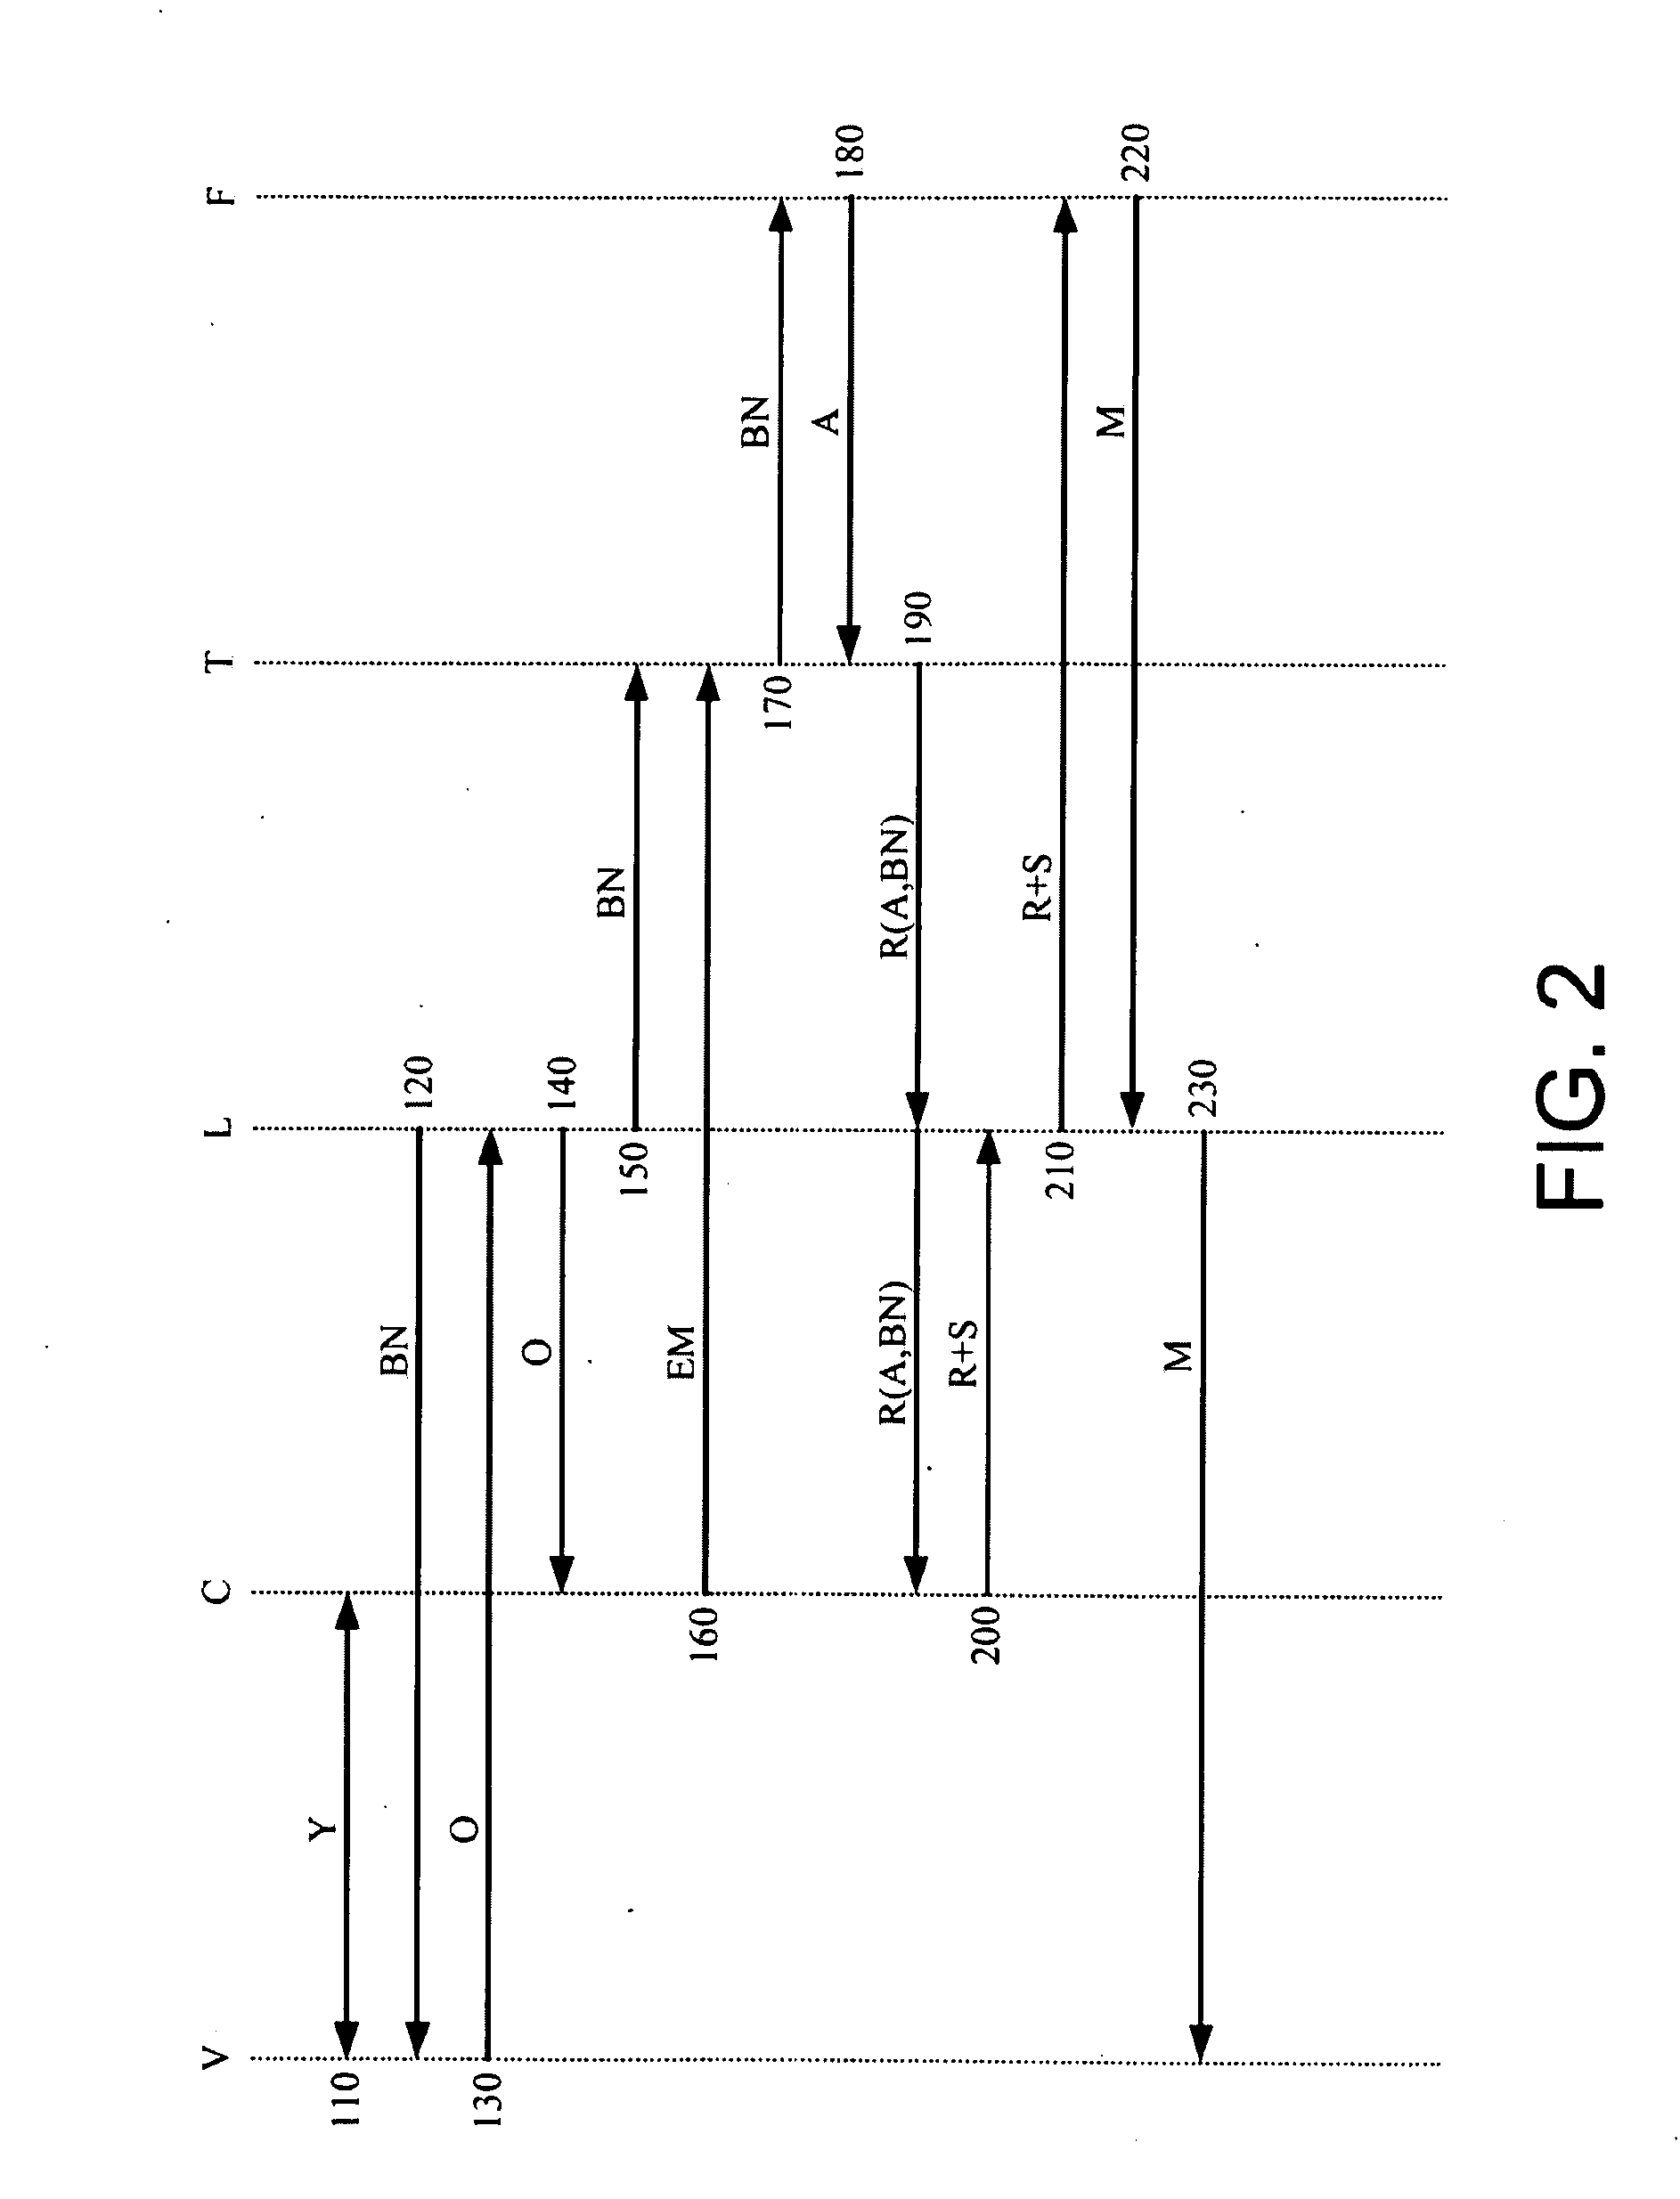 Non-Cash Cash-on-Delivery Method and System